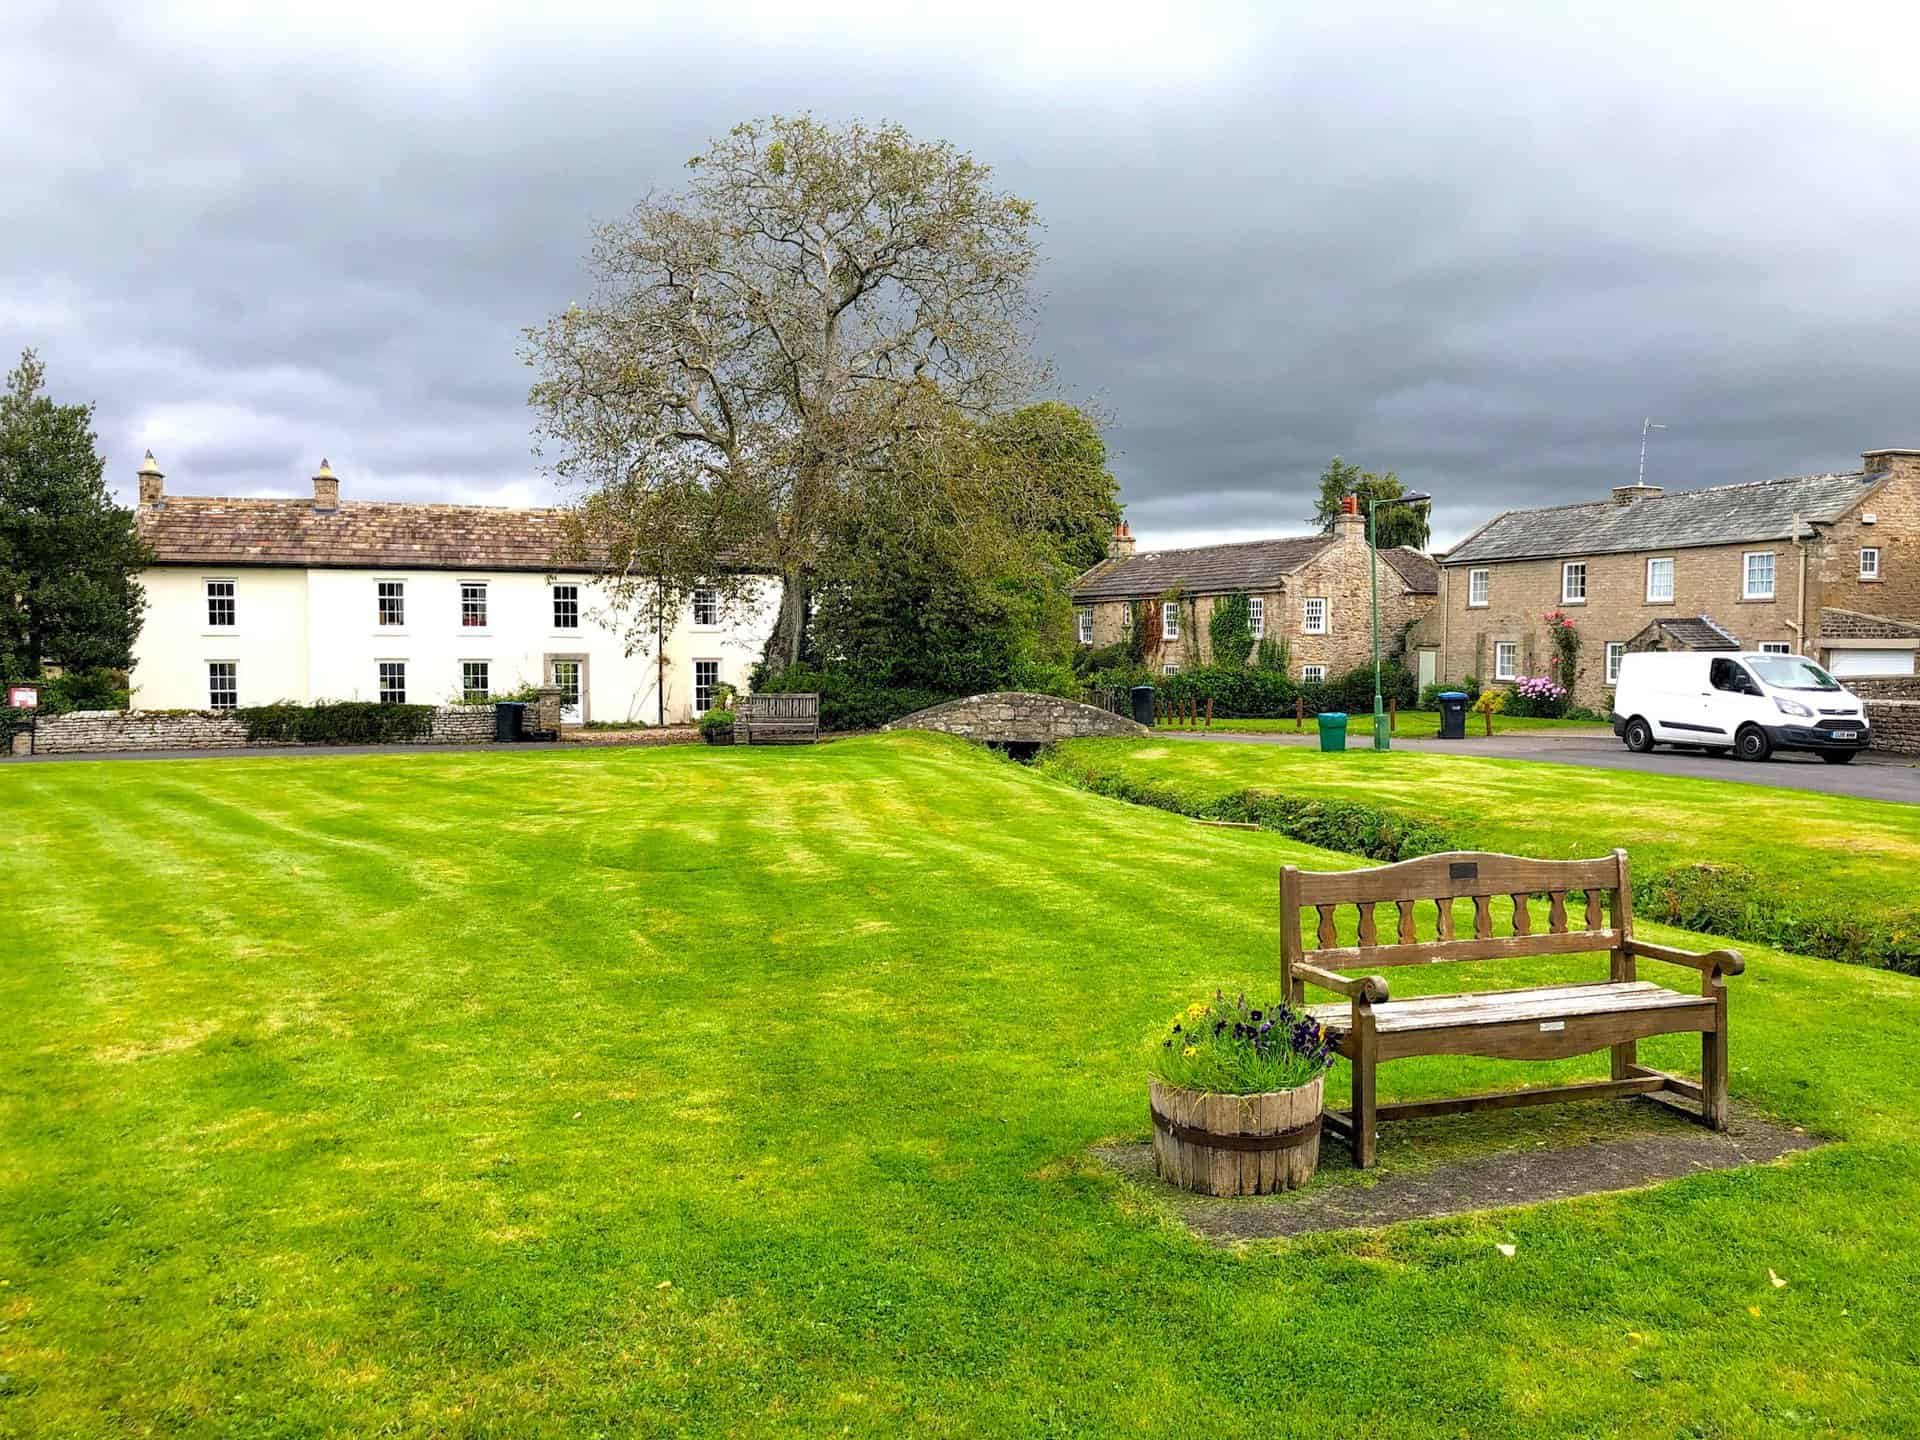 The village green in Cotherstone, emblematic of the area's charm.